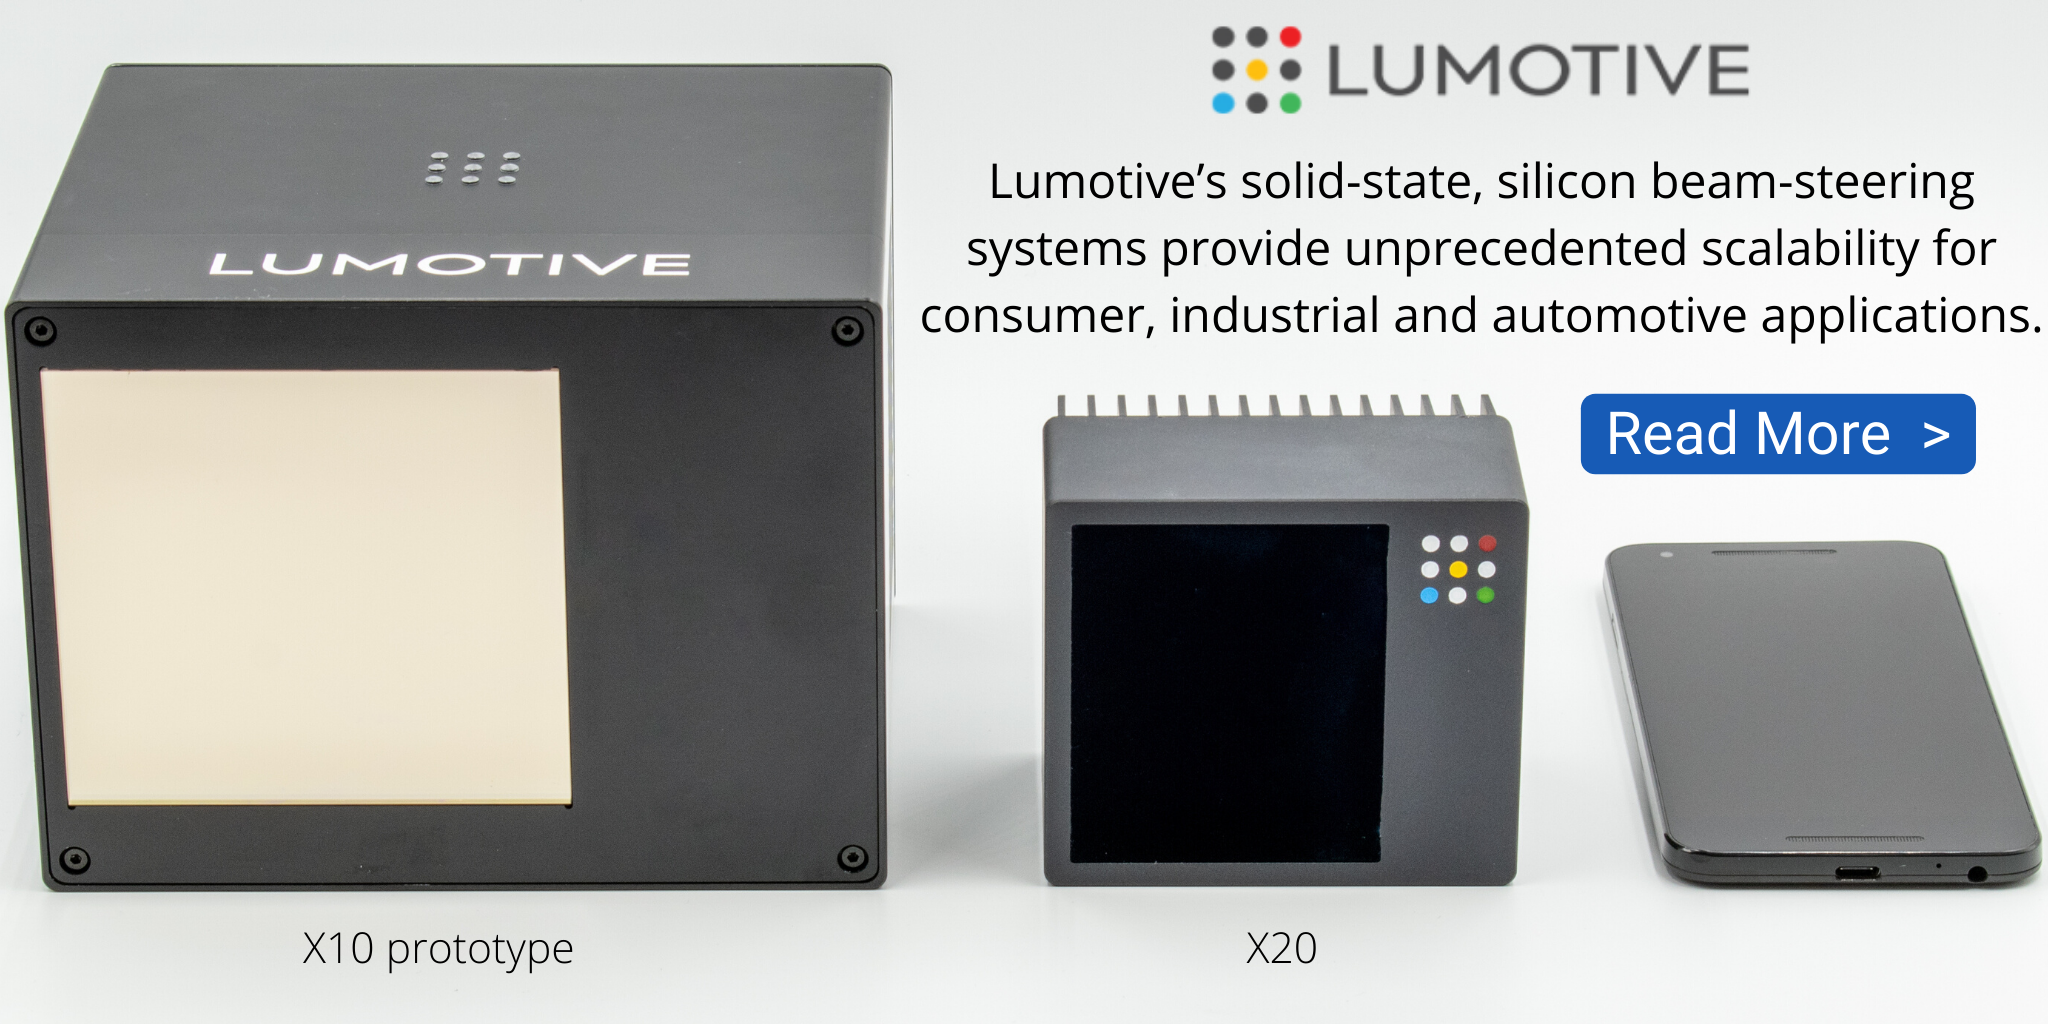 Lumotive, Monday, May 18, 2020, Press release picture